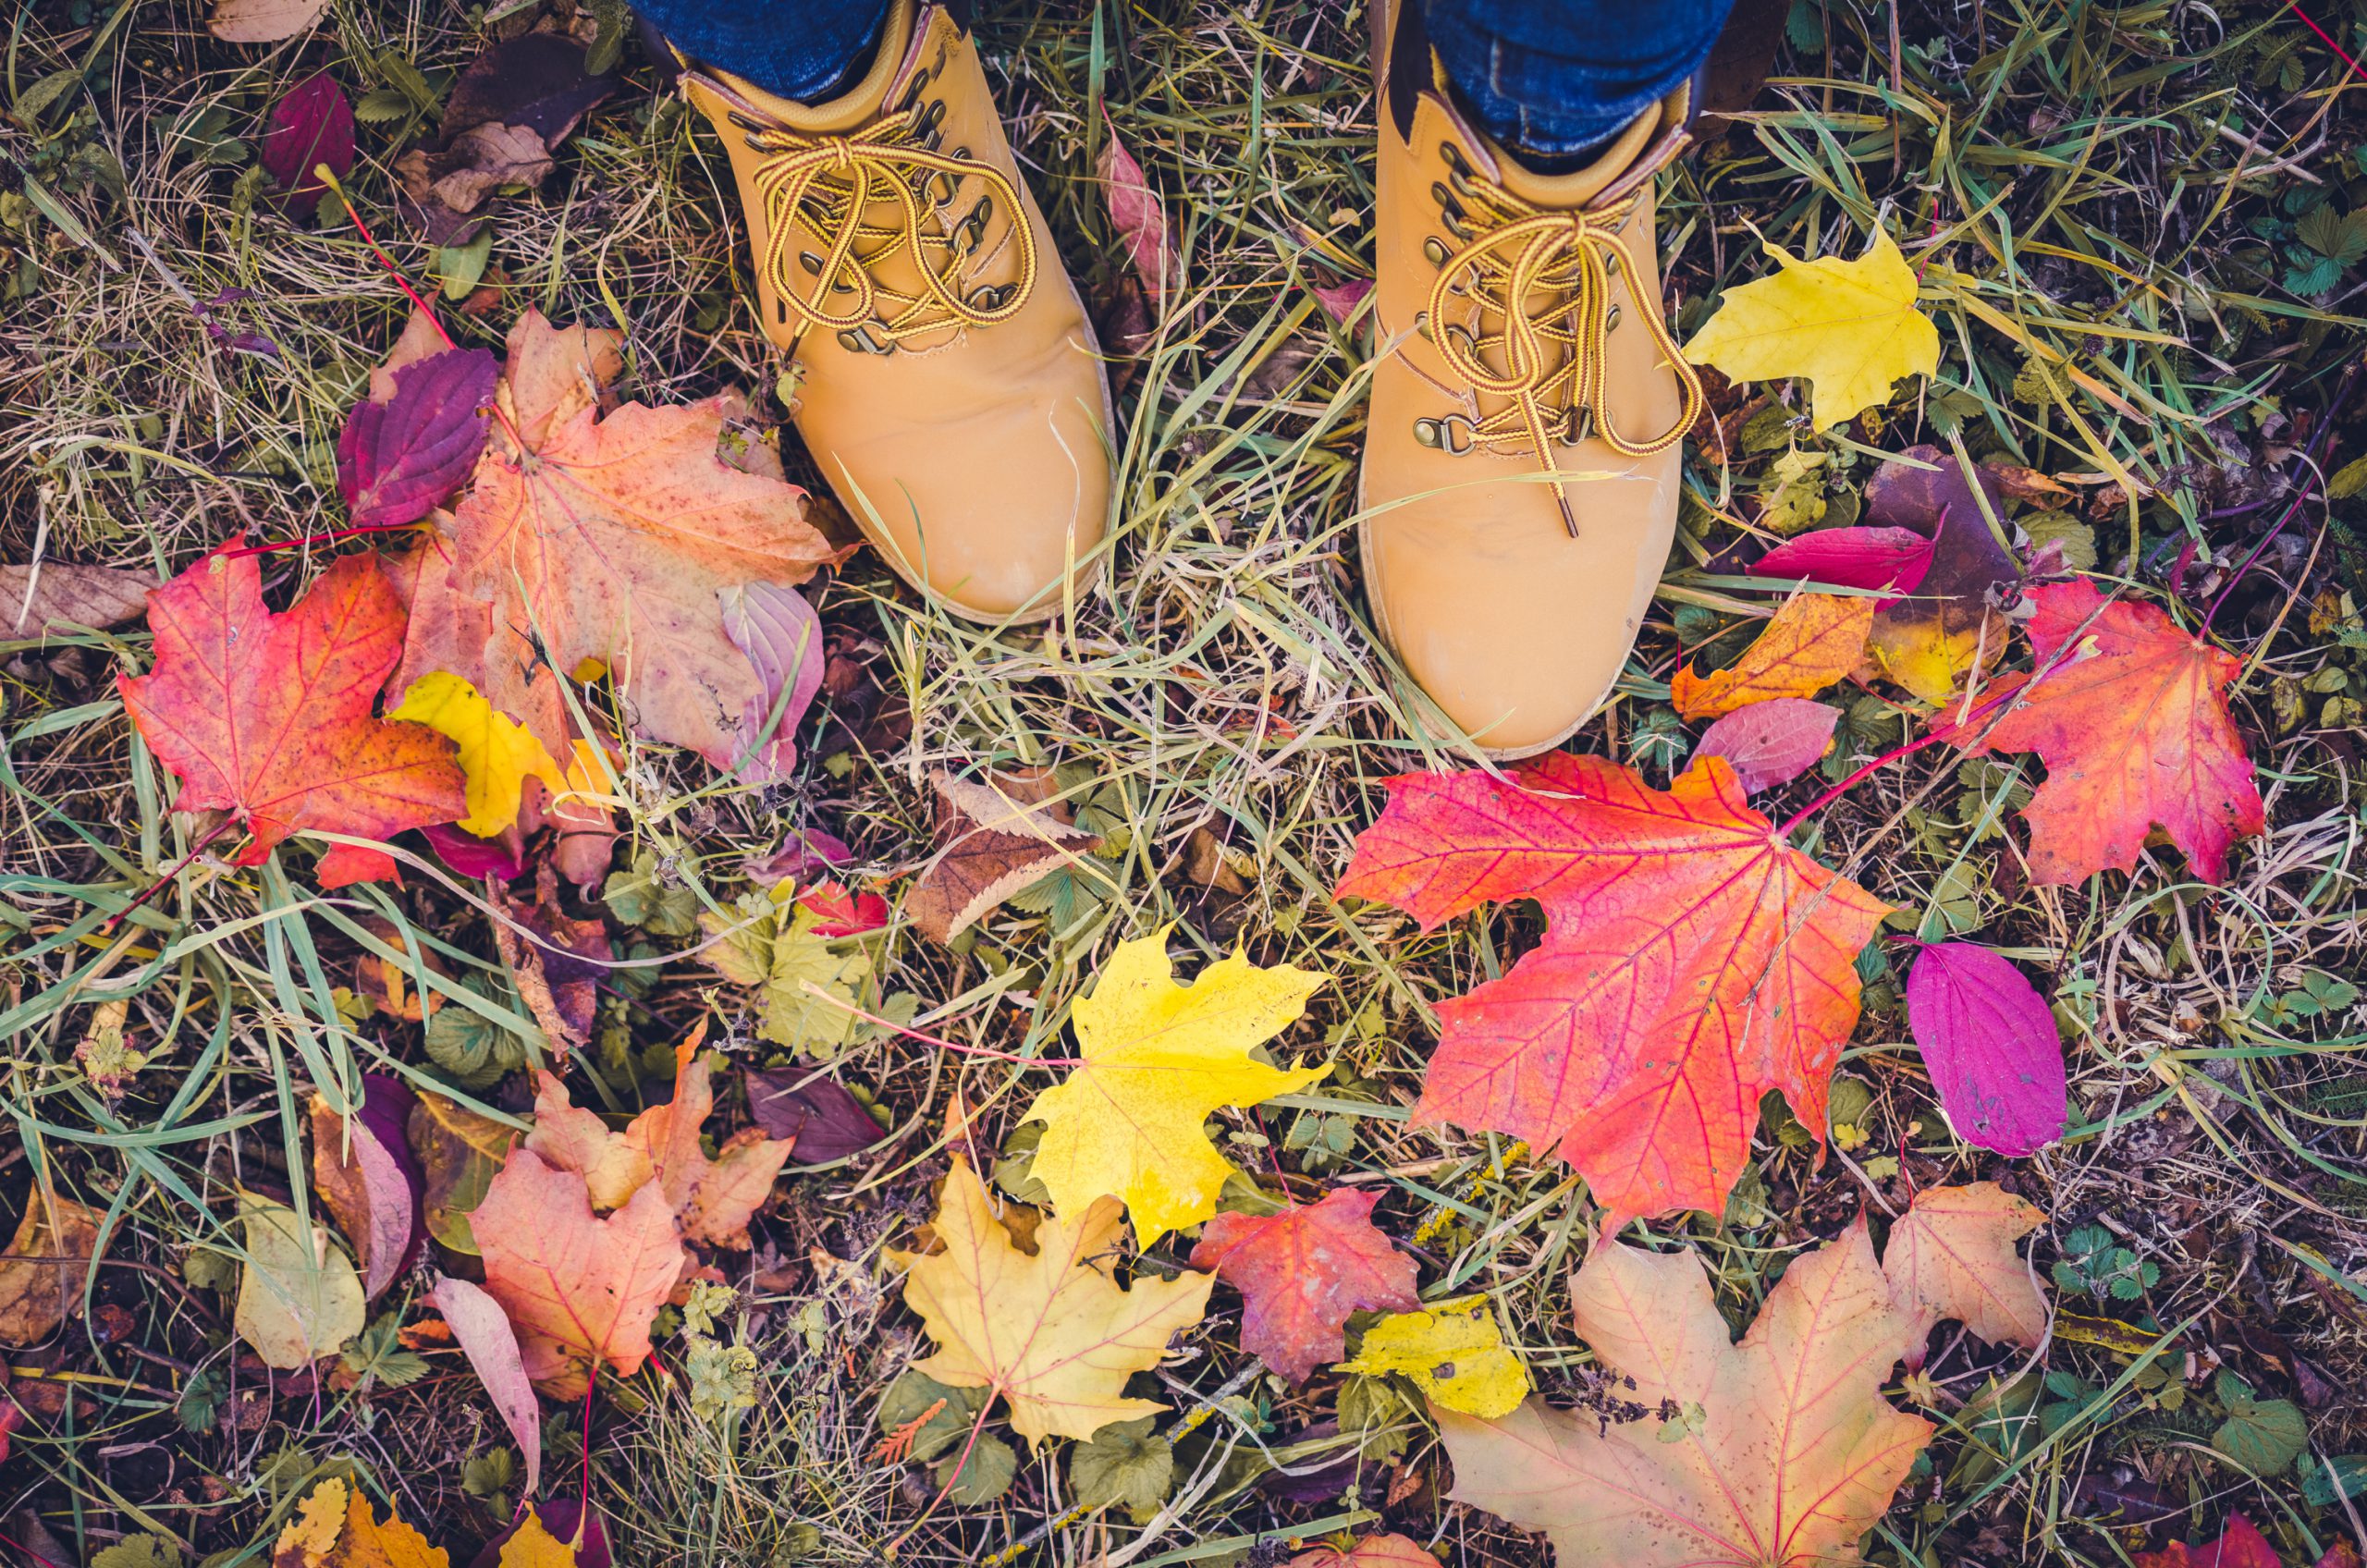 How To Prepare Your Yard For Winter